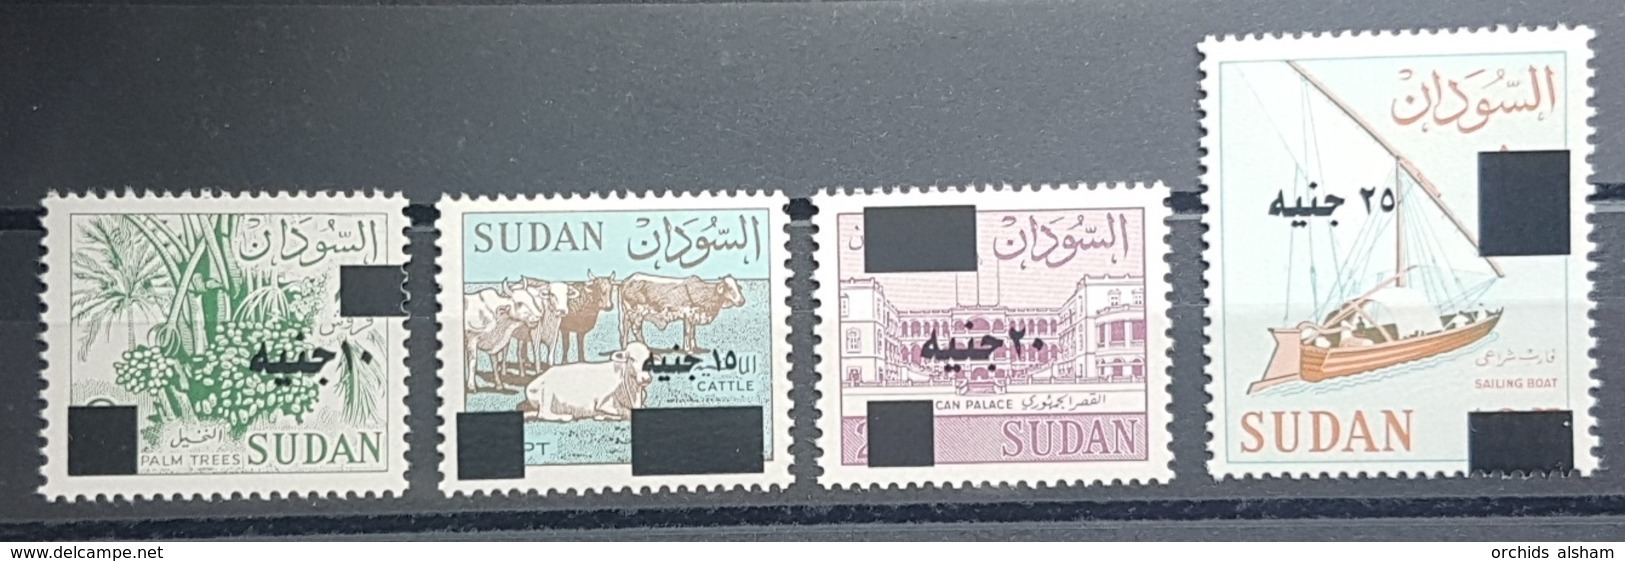 HXSU1 - Sudan 2018 Complete Year Issues MNH - Stamps Surcharged New Values - Sudan (1954-...)